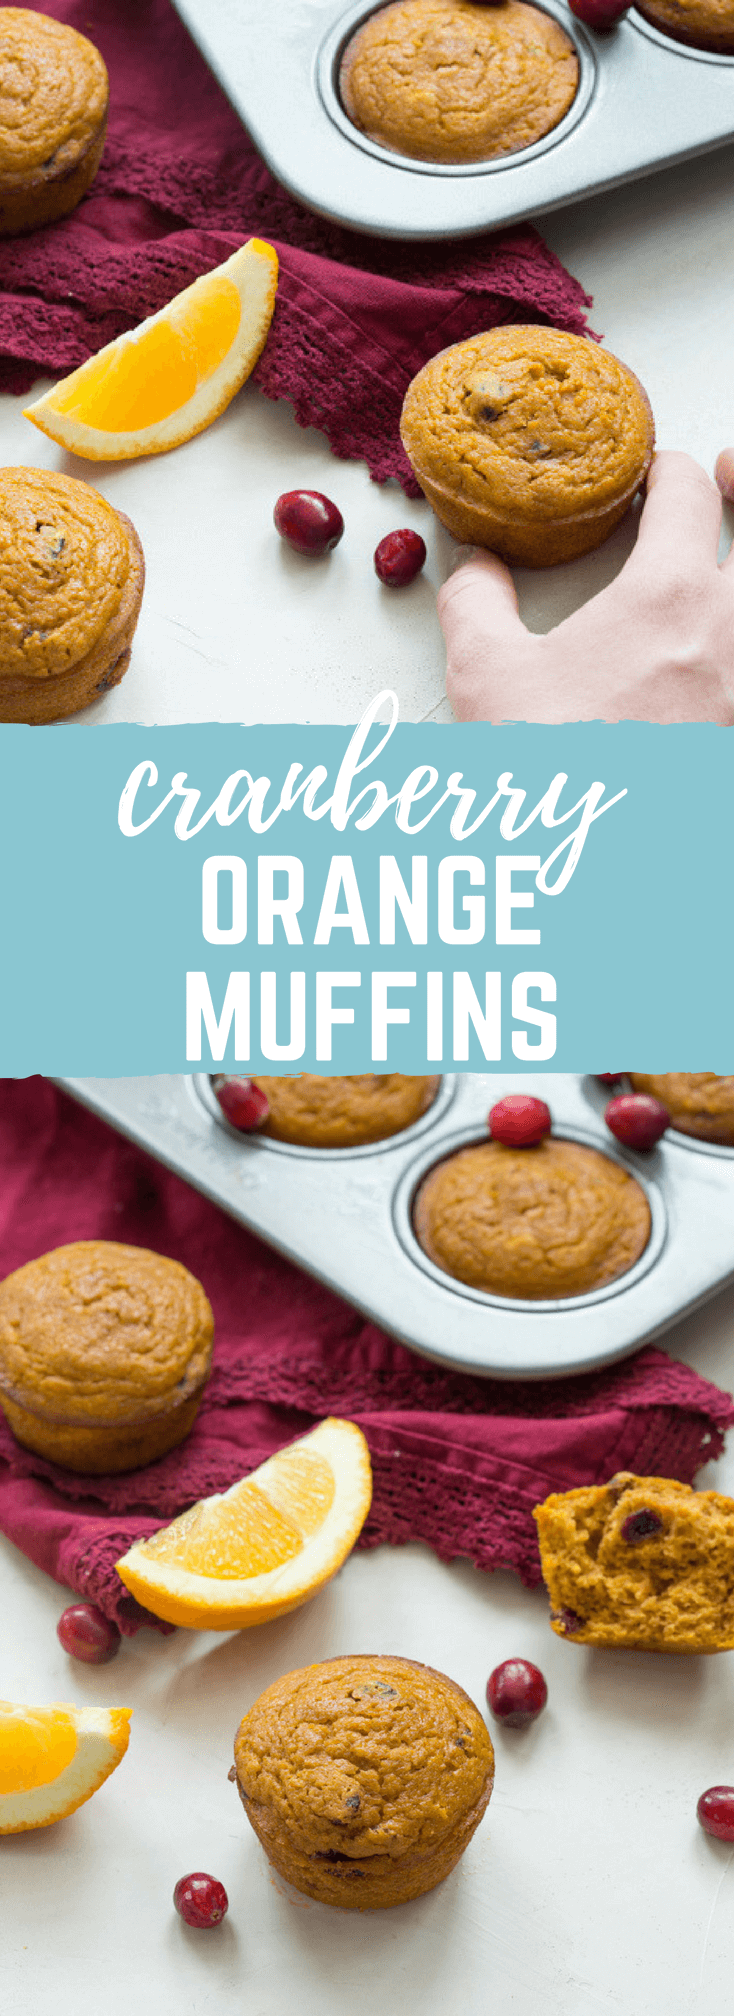 These gluten free Pumpkin Cranberry Orange Muffins are what I like to call "Morning Glory". They are an early morning, warm cup of chai tea with a splash of eggnog, and a cozy-blanket-snuggle-on-the-sofa type of muffins.